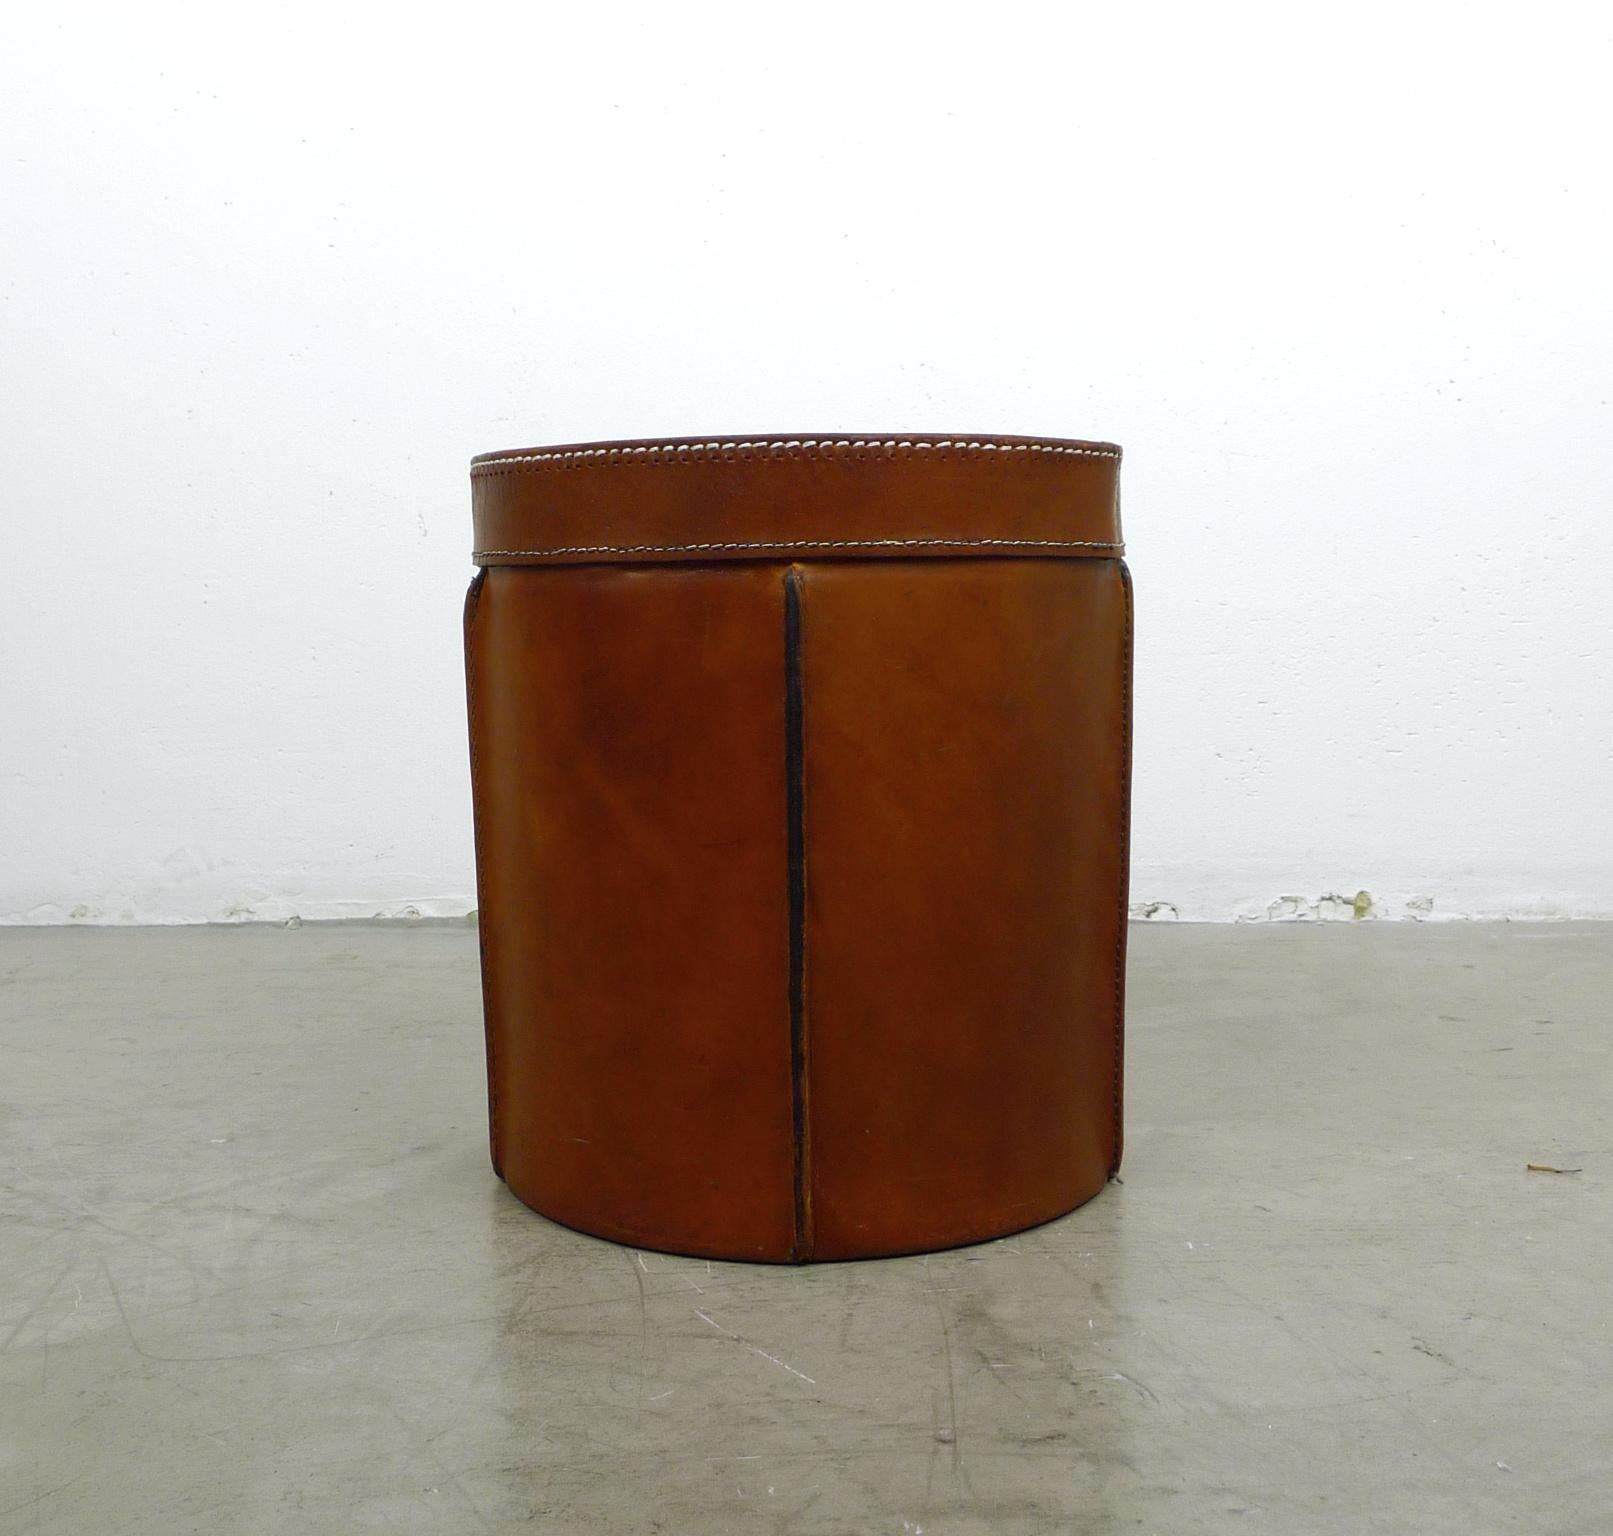 Round paper basket made of thick cognac-colored cowhide from the 1960s. The body is sewn in individual leather elements with white yarn on vertical bars. The interior is lined with a lighter leather. It is in very good condition.